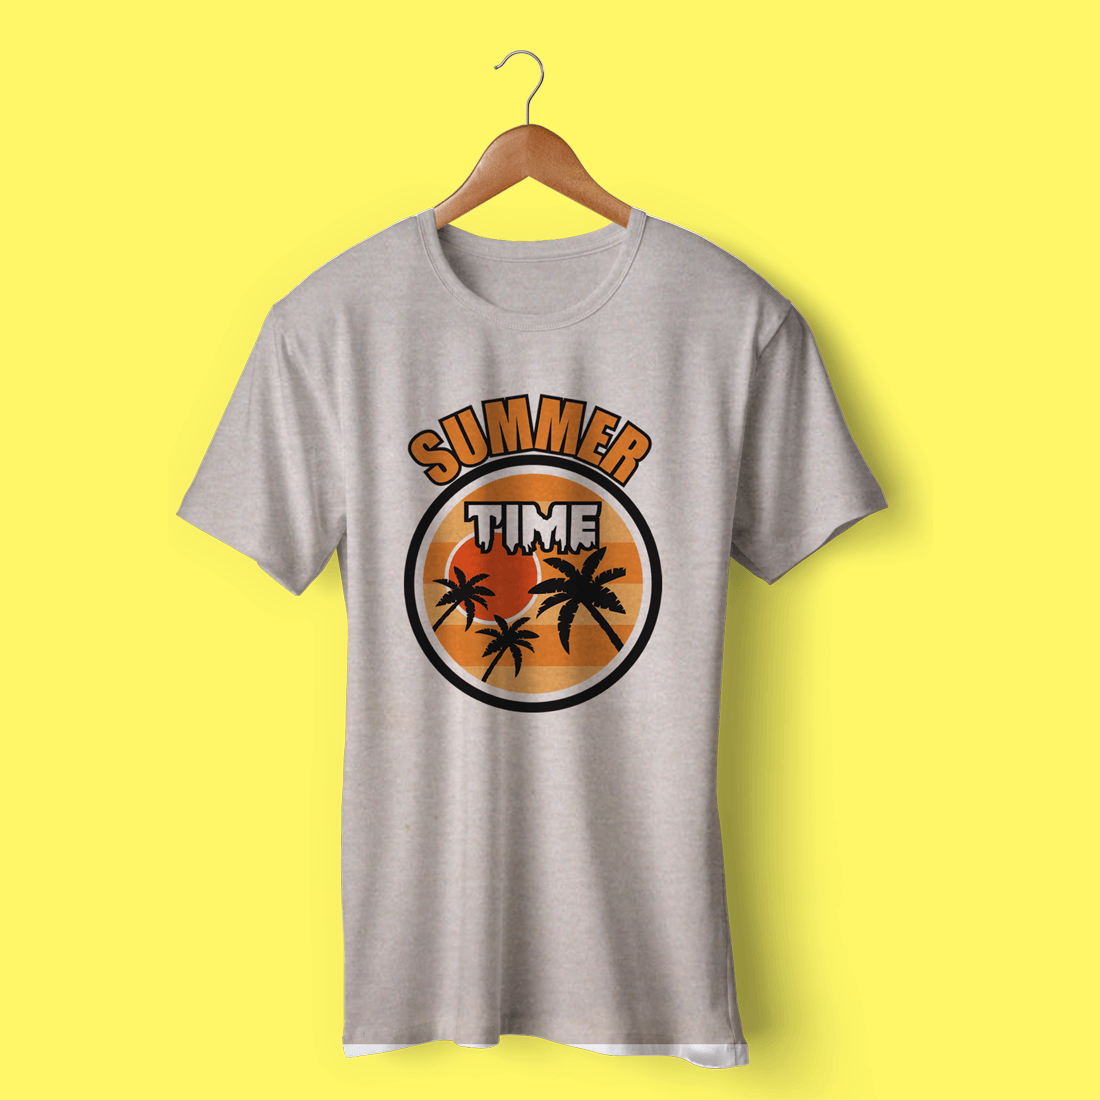 T - shirt that says summer time on it.